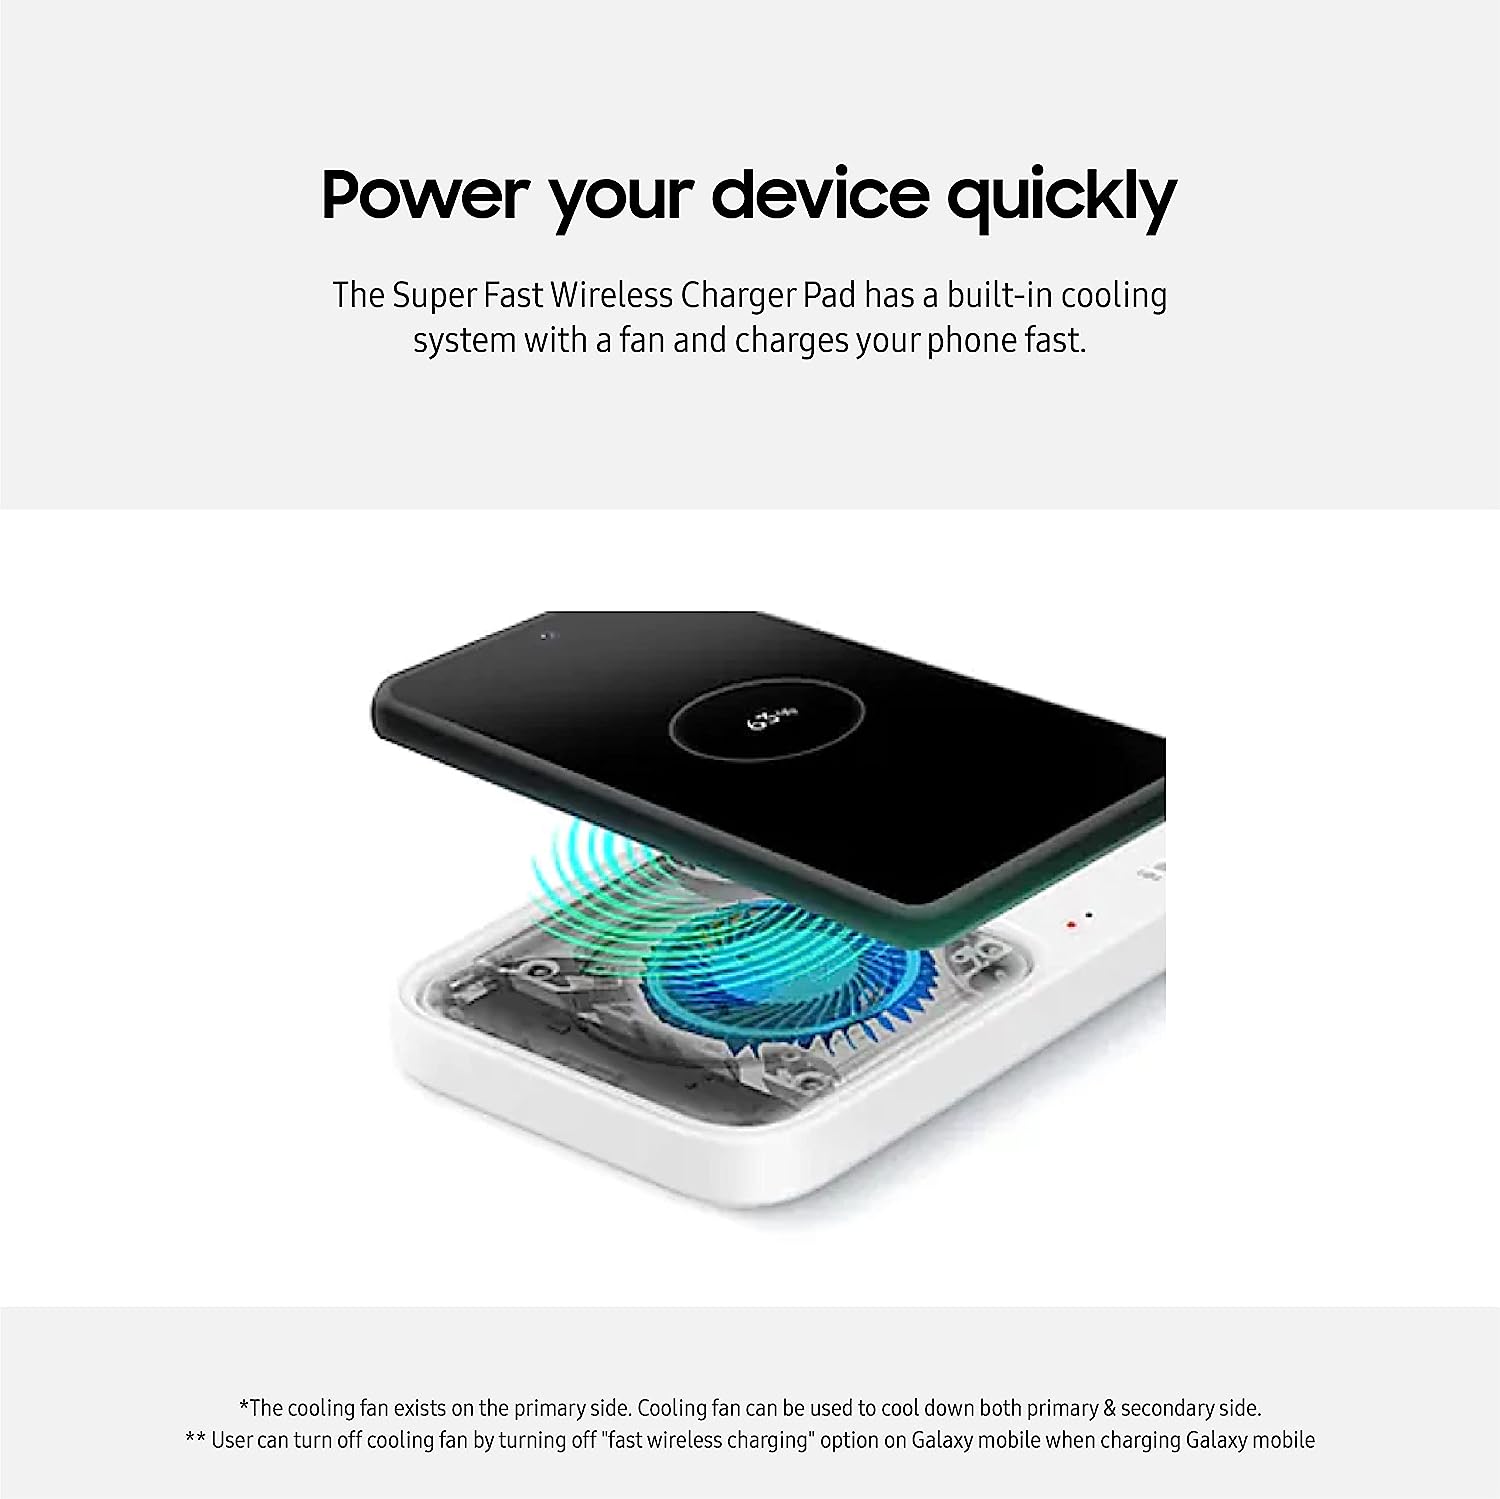 SAMSUNG 15W Wireless Charger Duo Super Fast Charging Pad for Galaxy Phones and Devices - Black